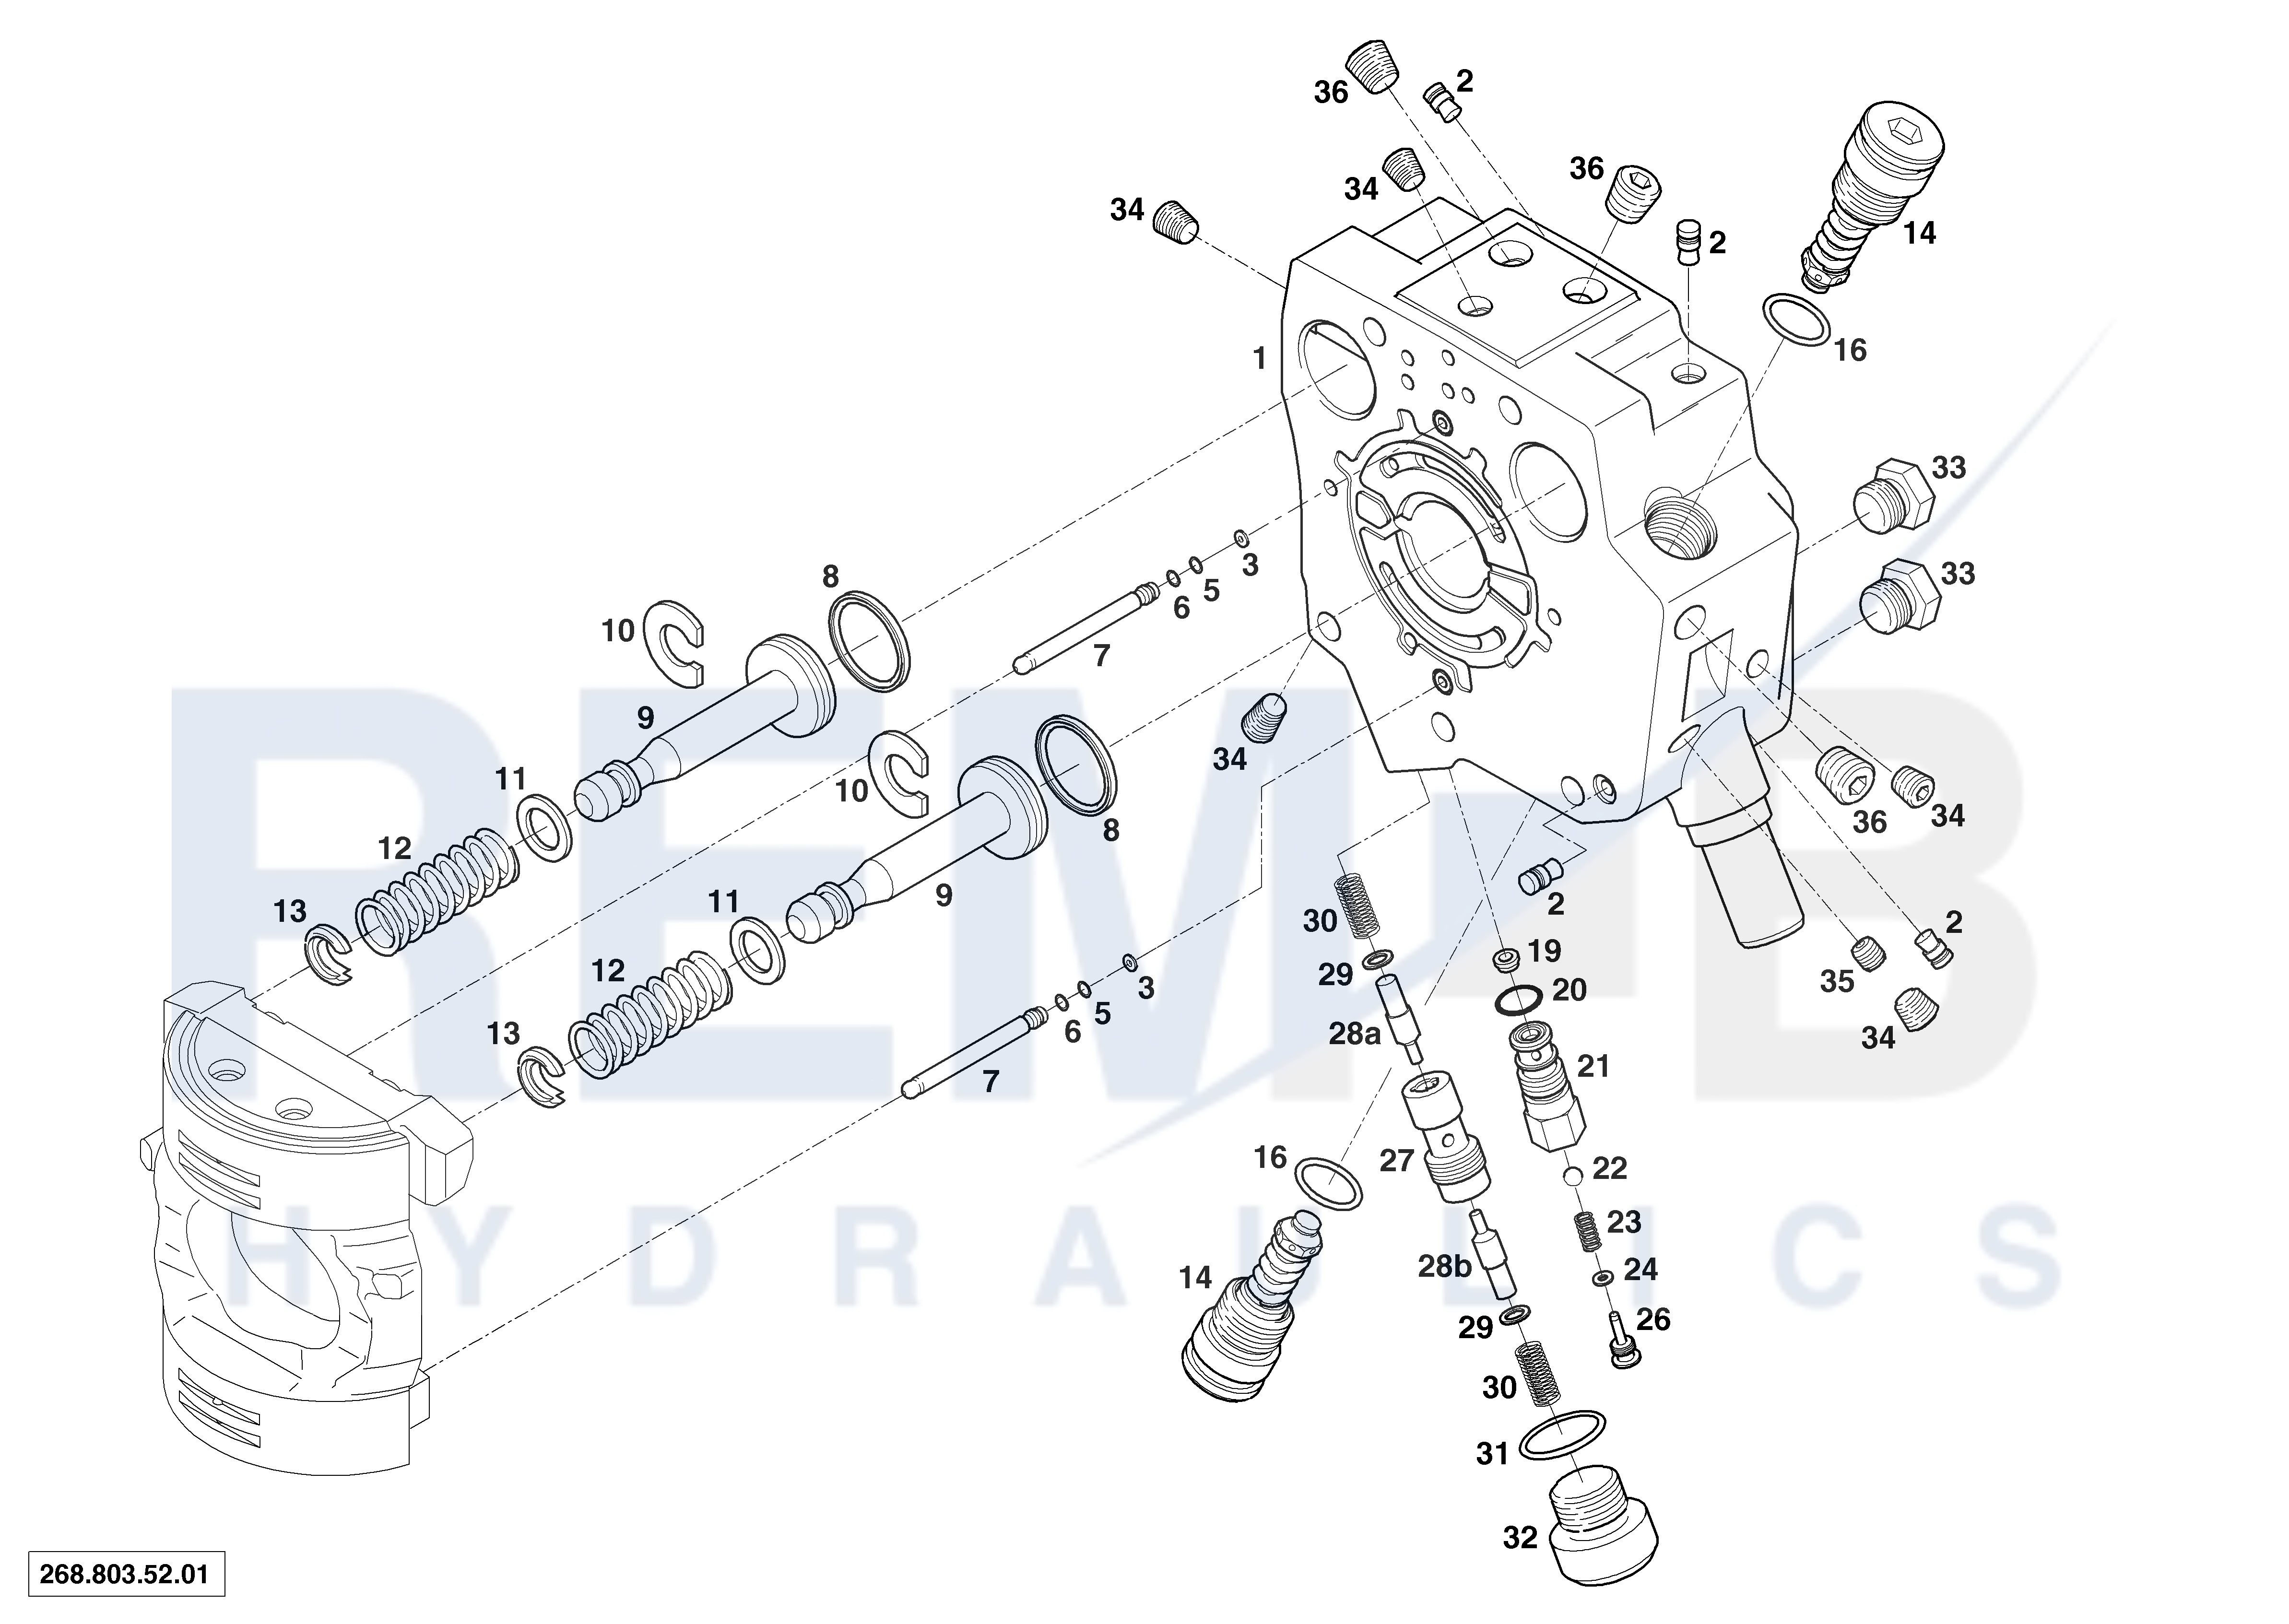 REAR COVER AND VALVE (268.000.25.02)